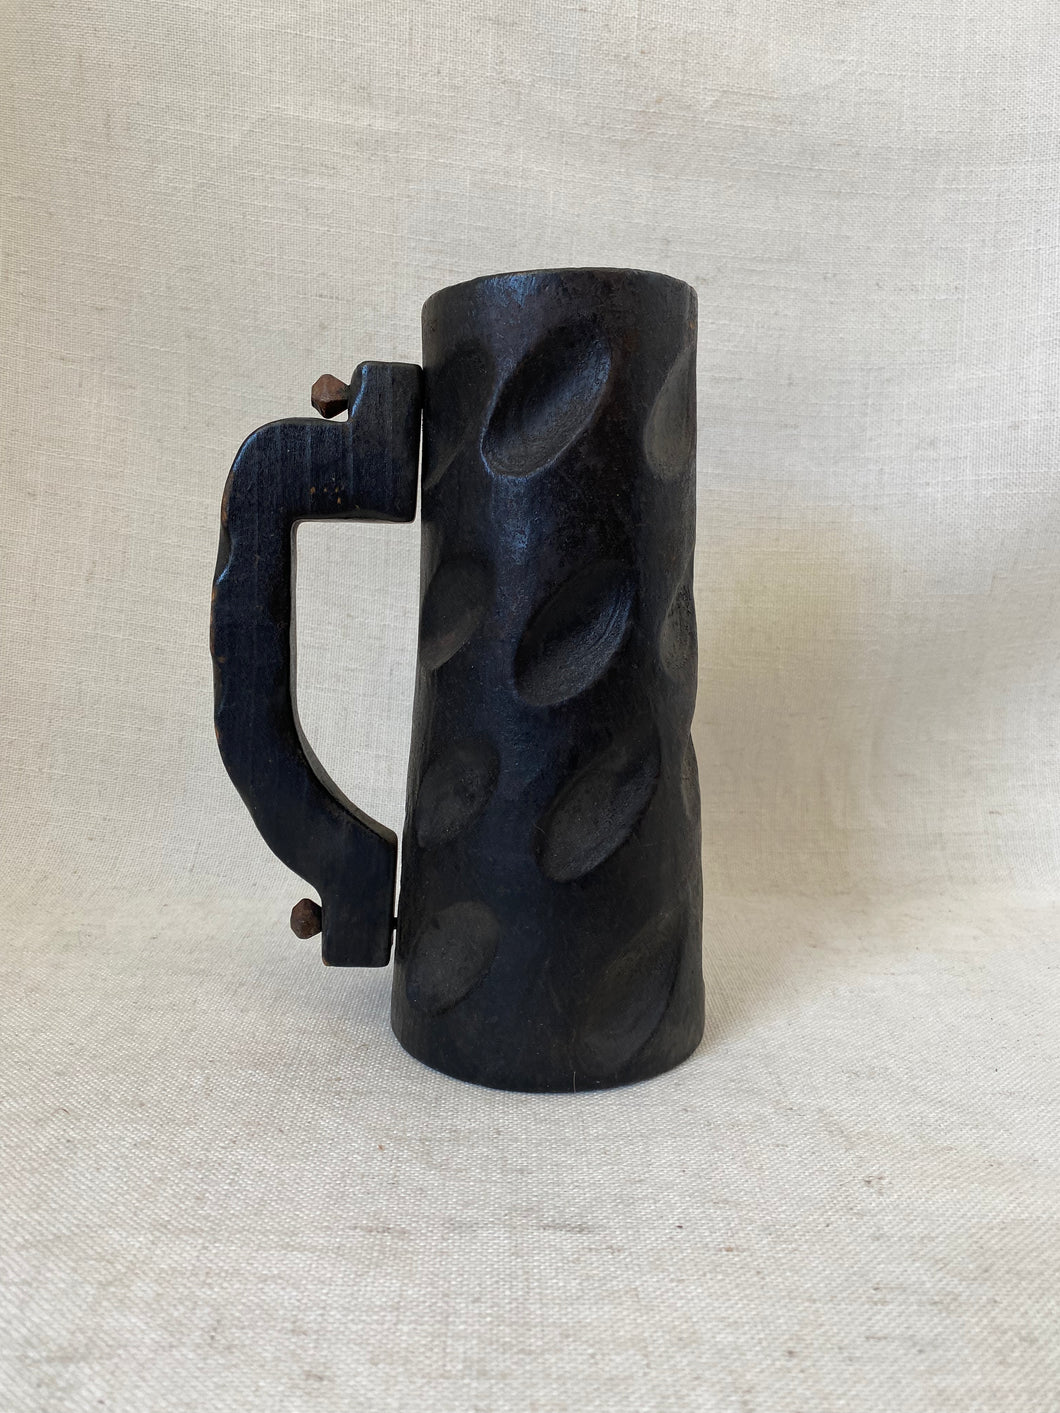 Hand Carved Wooden Beer Stein - Lobeco, Made in Spain